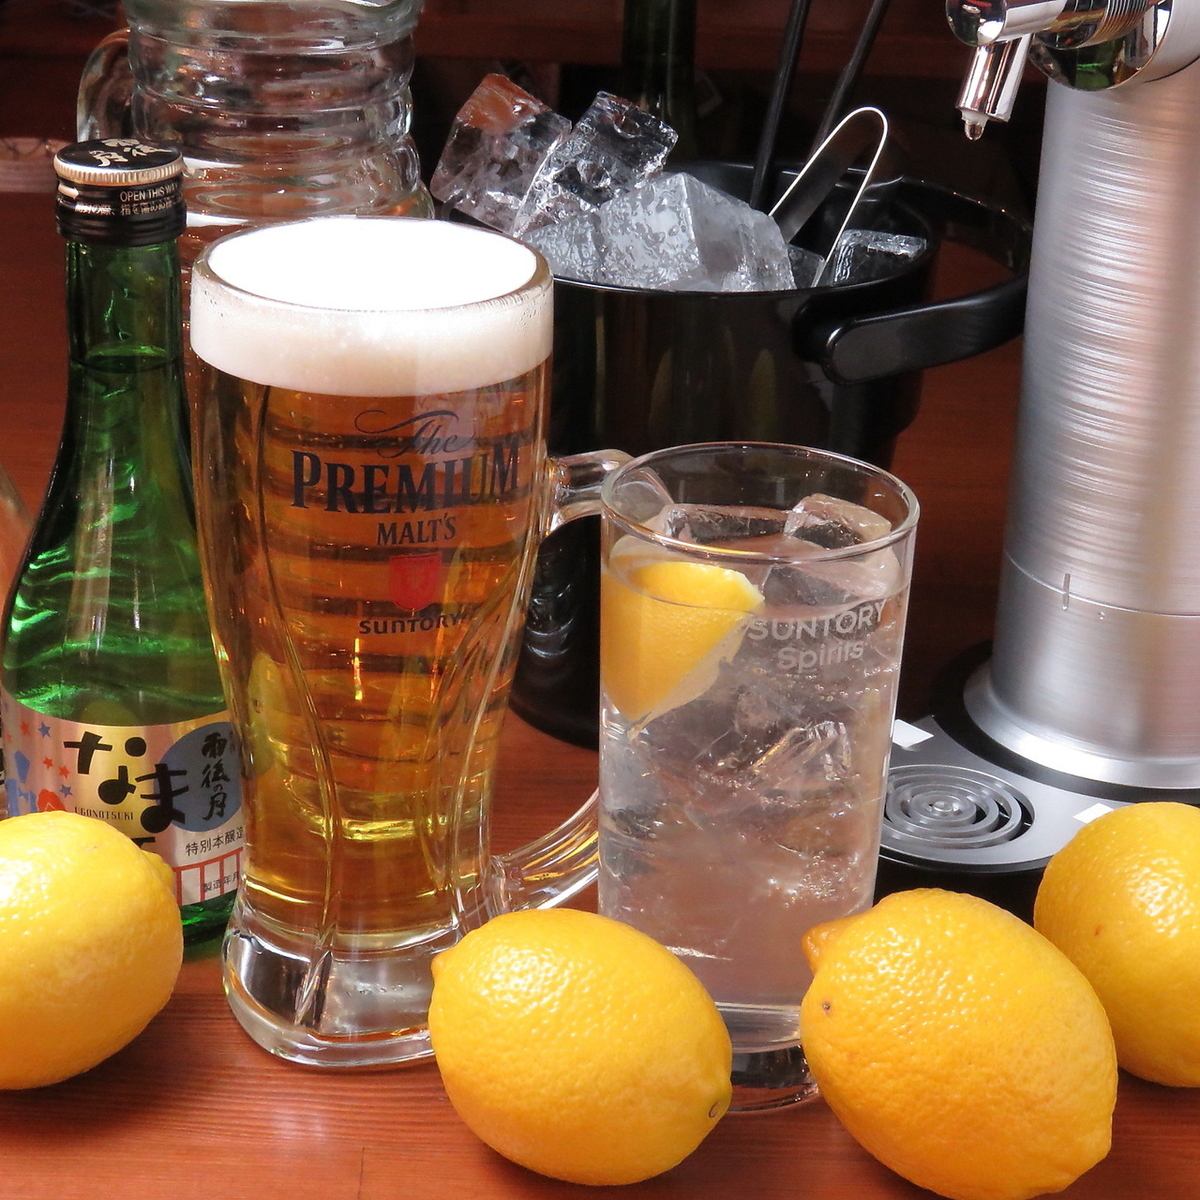 All you can drink for 2 hours! All you can drink lemon sour for 30 minutes for 330 yen (tax included)!